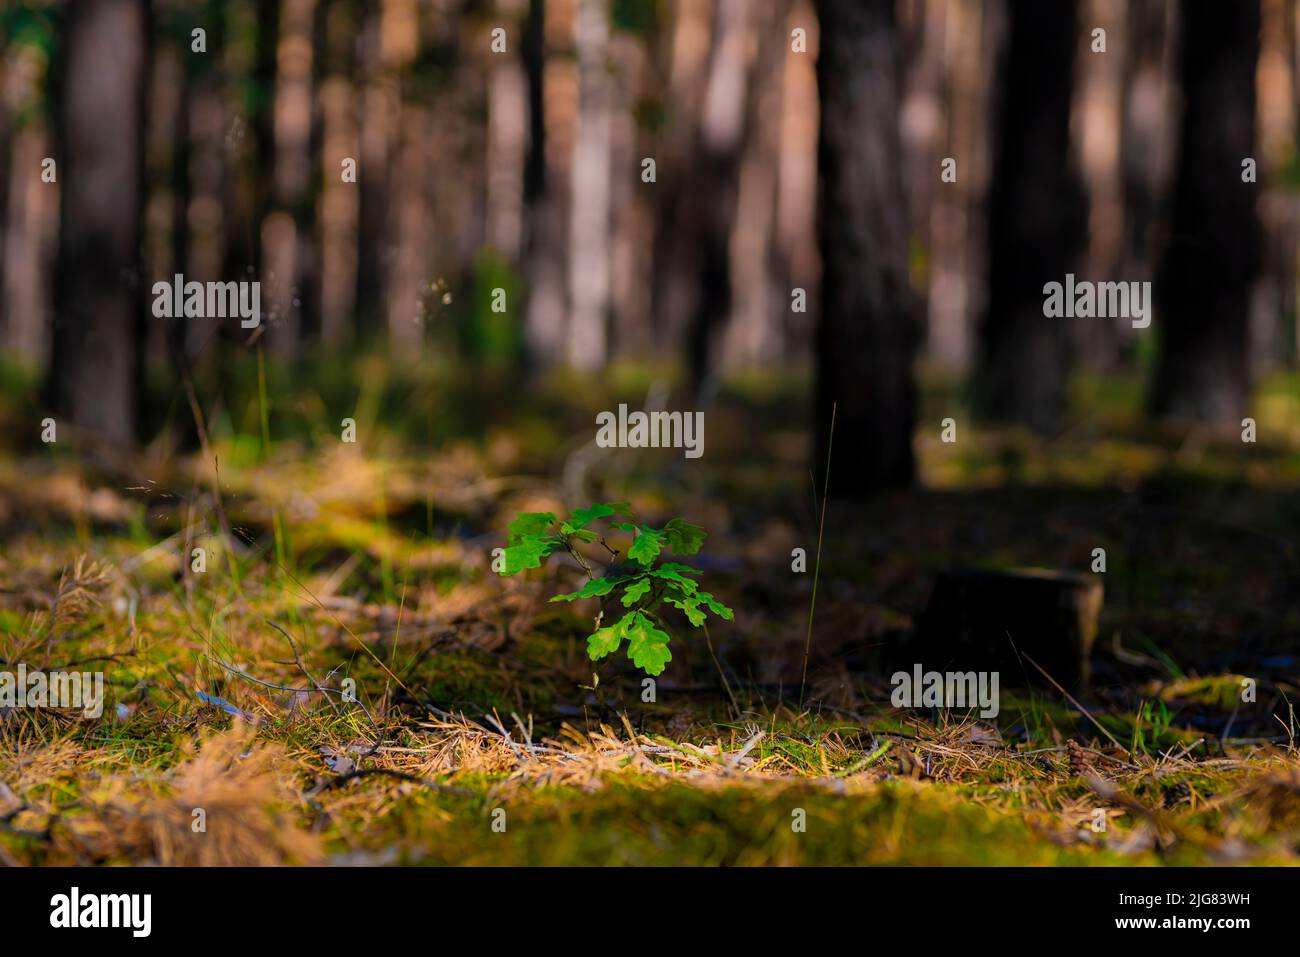 Very young small oak tree in a pine forest in summer Stock Photo